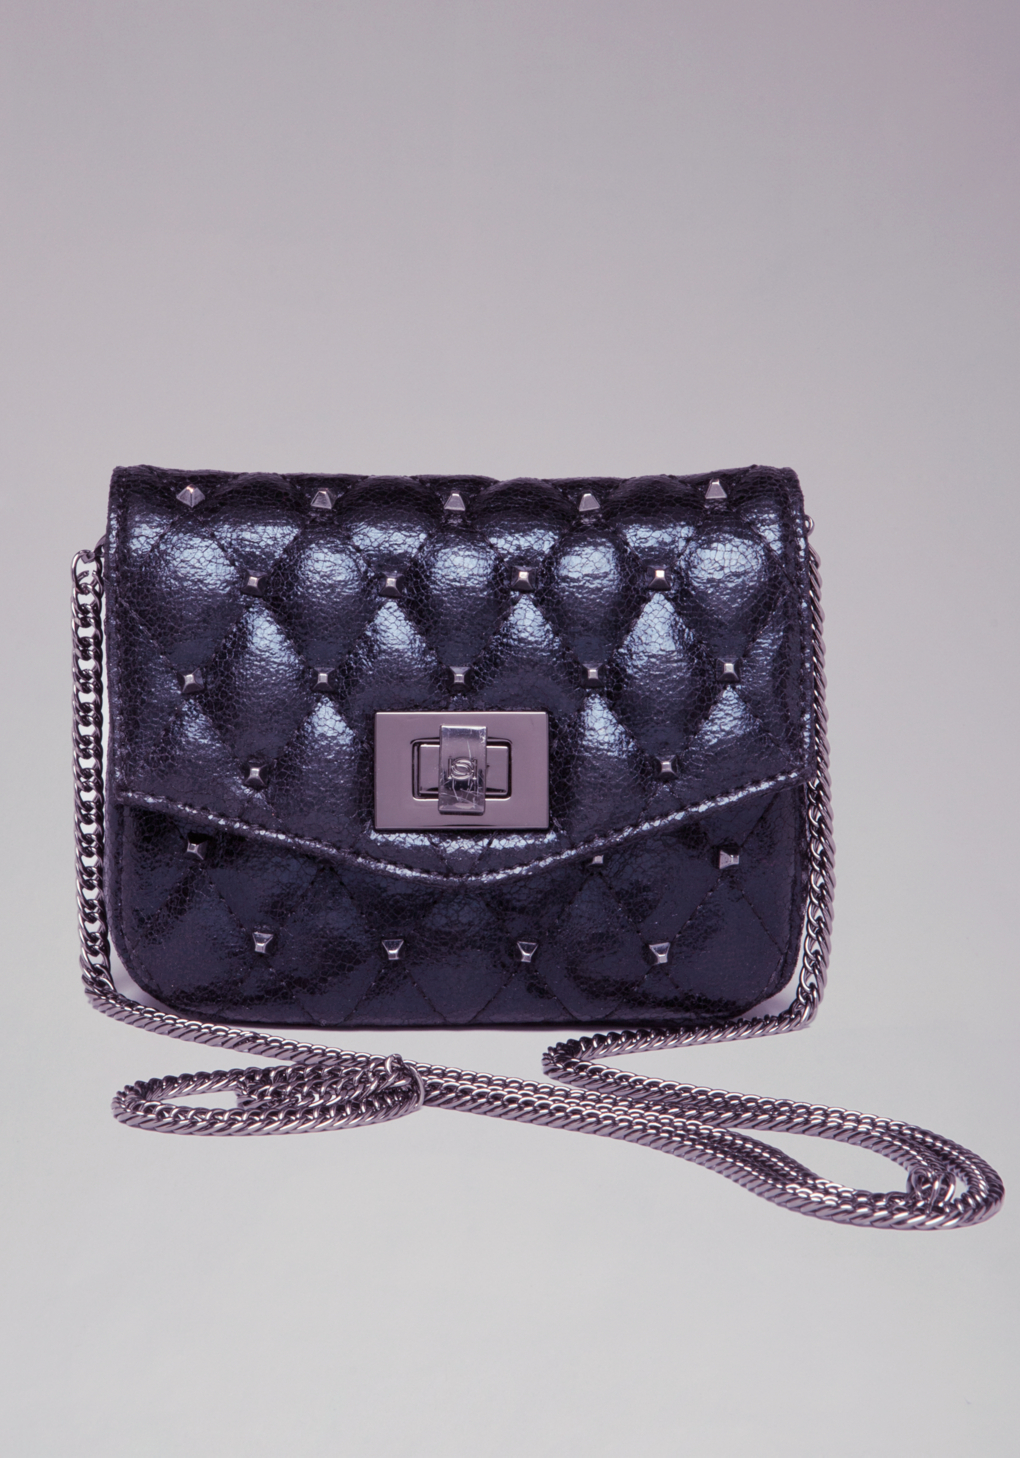 Bebe Ava Quilted Mini Crossbody Bag in Purple | Lyst